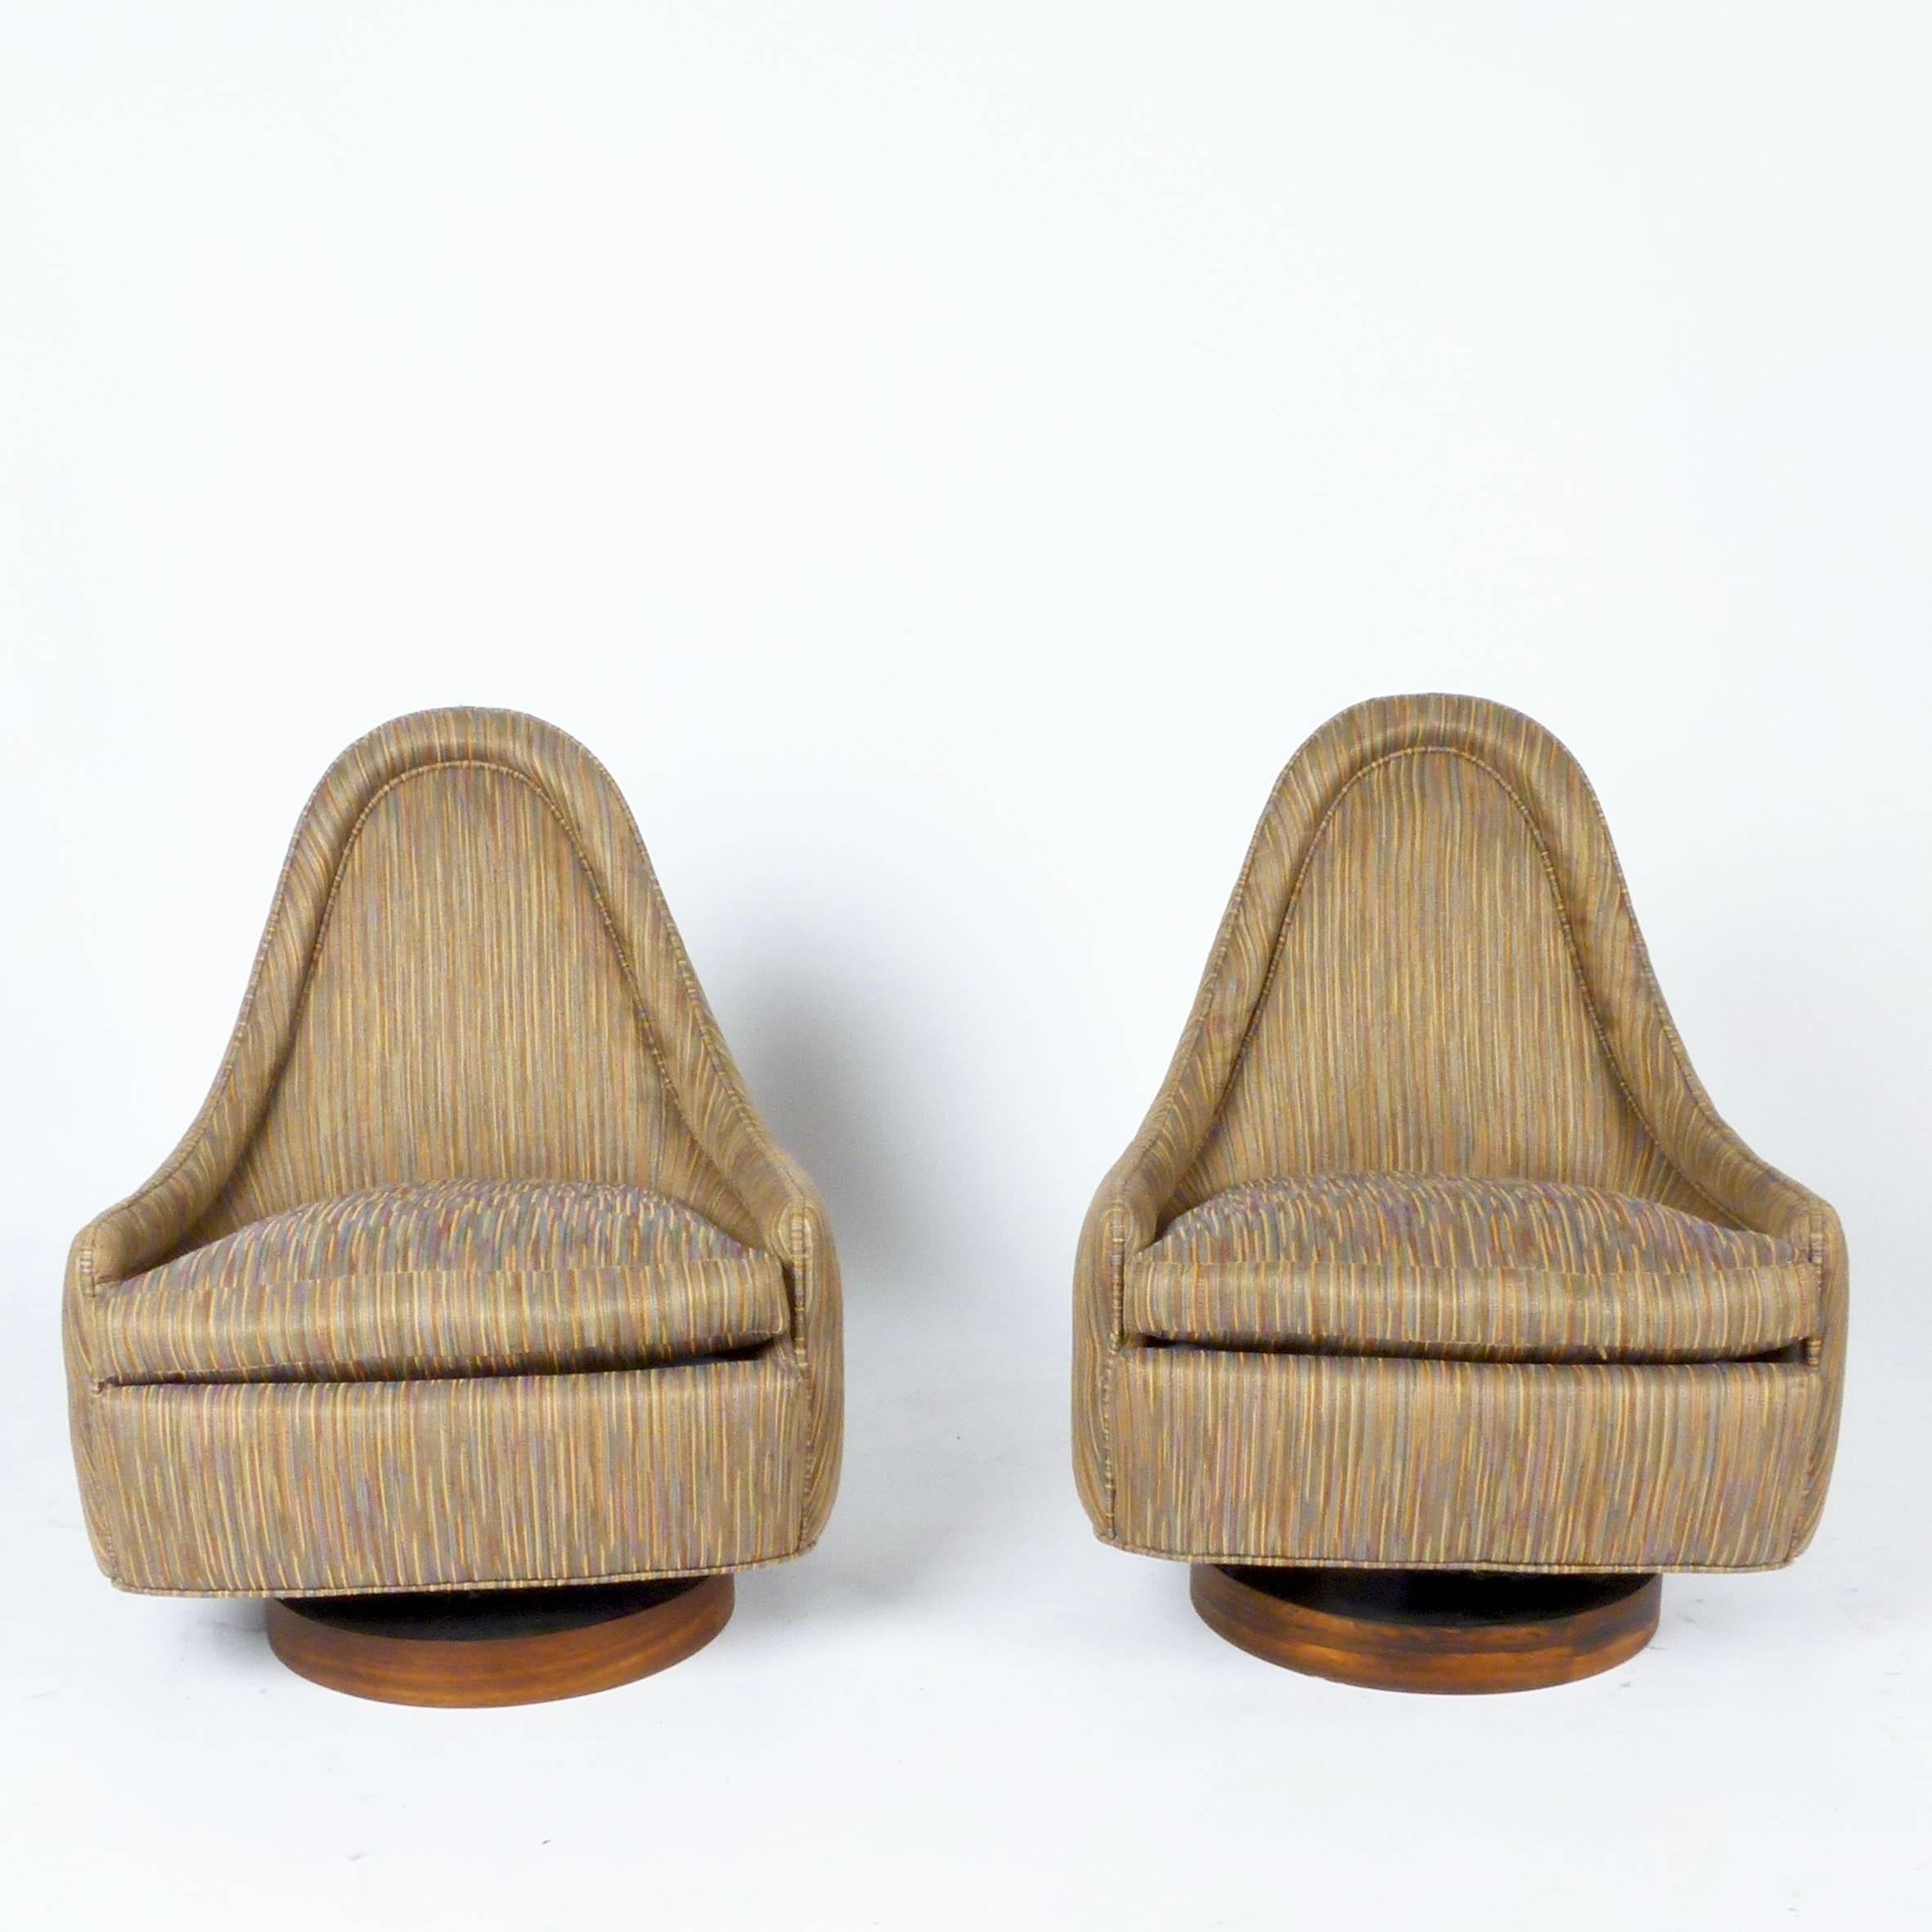 Unique pair of petite form swivel rocking chairs designed by Milo Baughman. Very comfortable upholstered seat over rosewood block base.